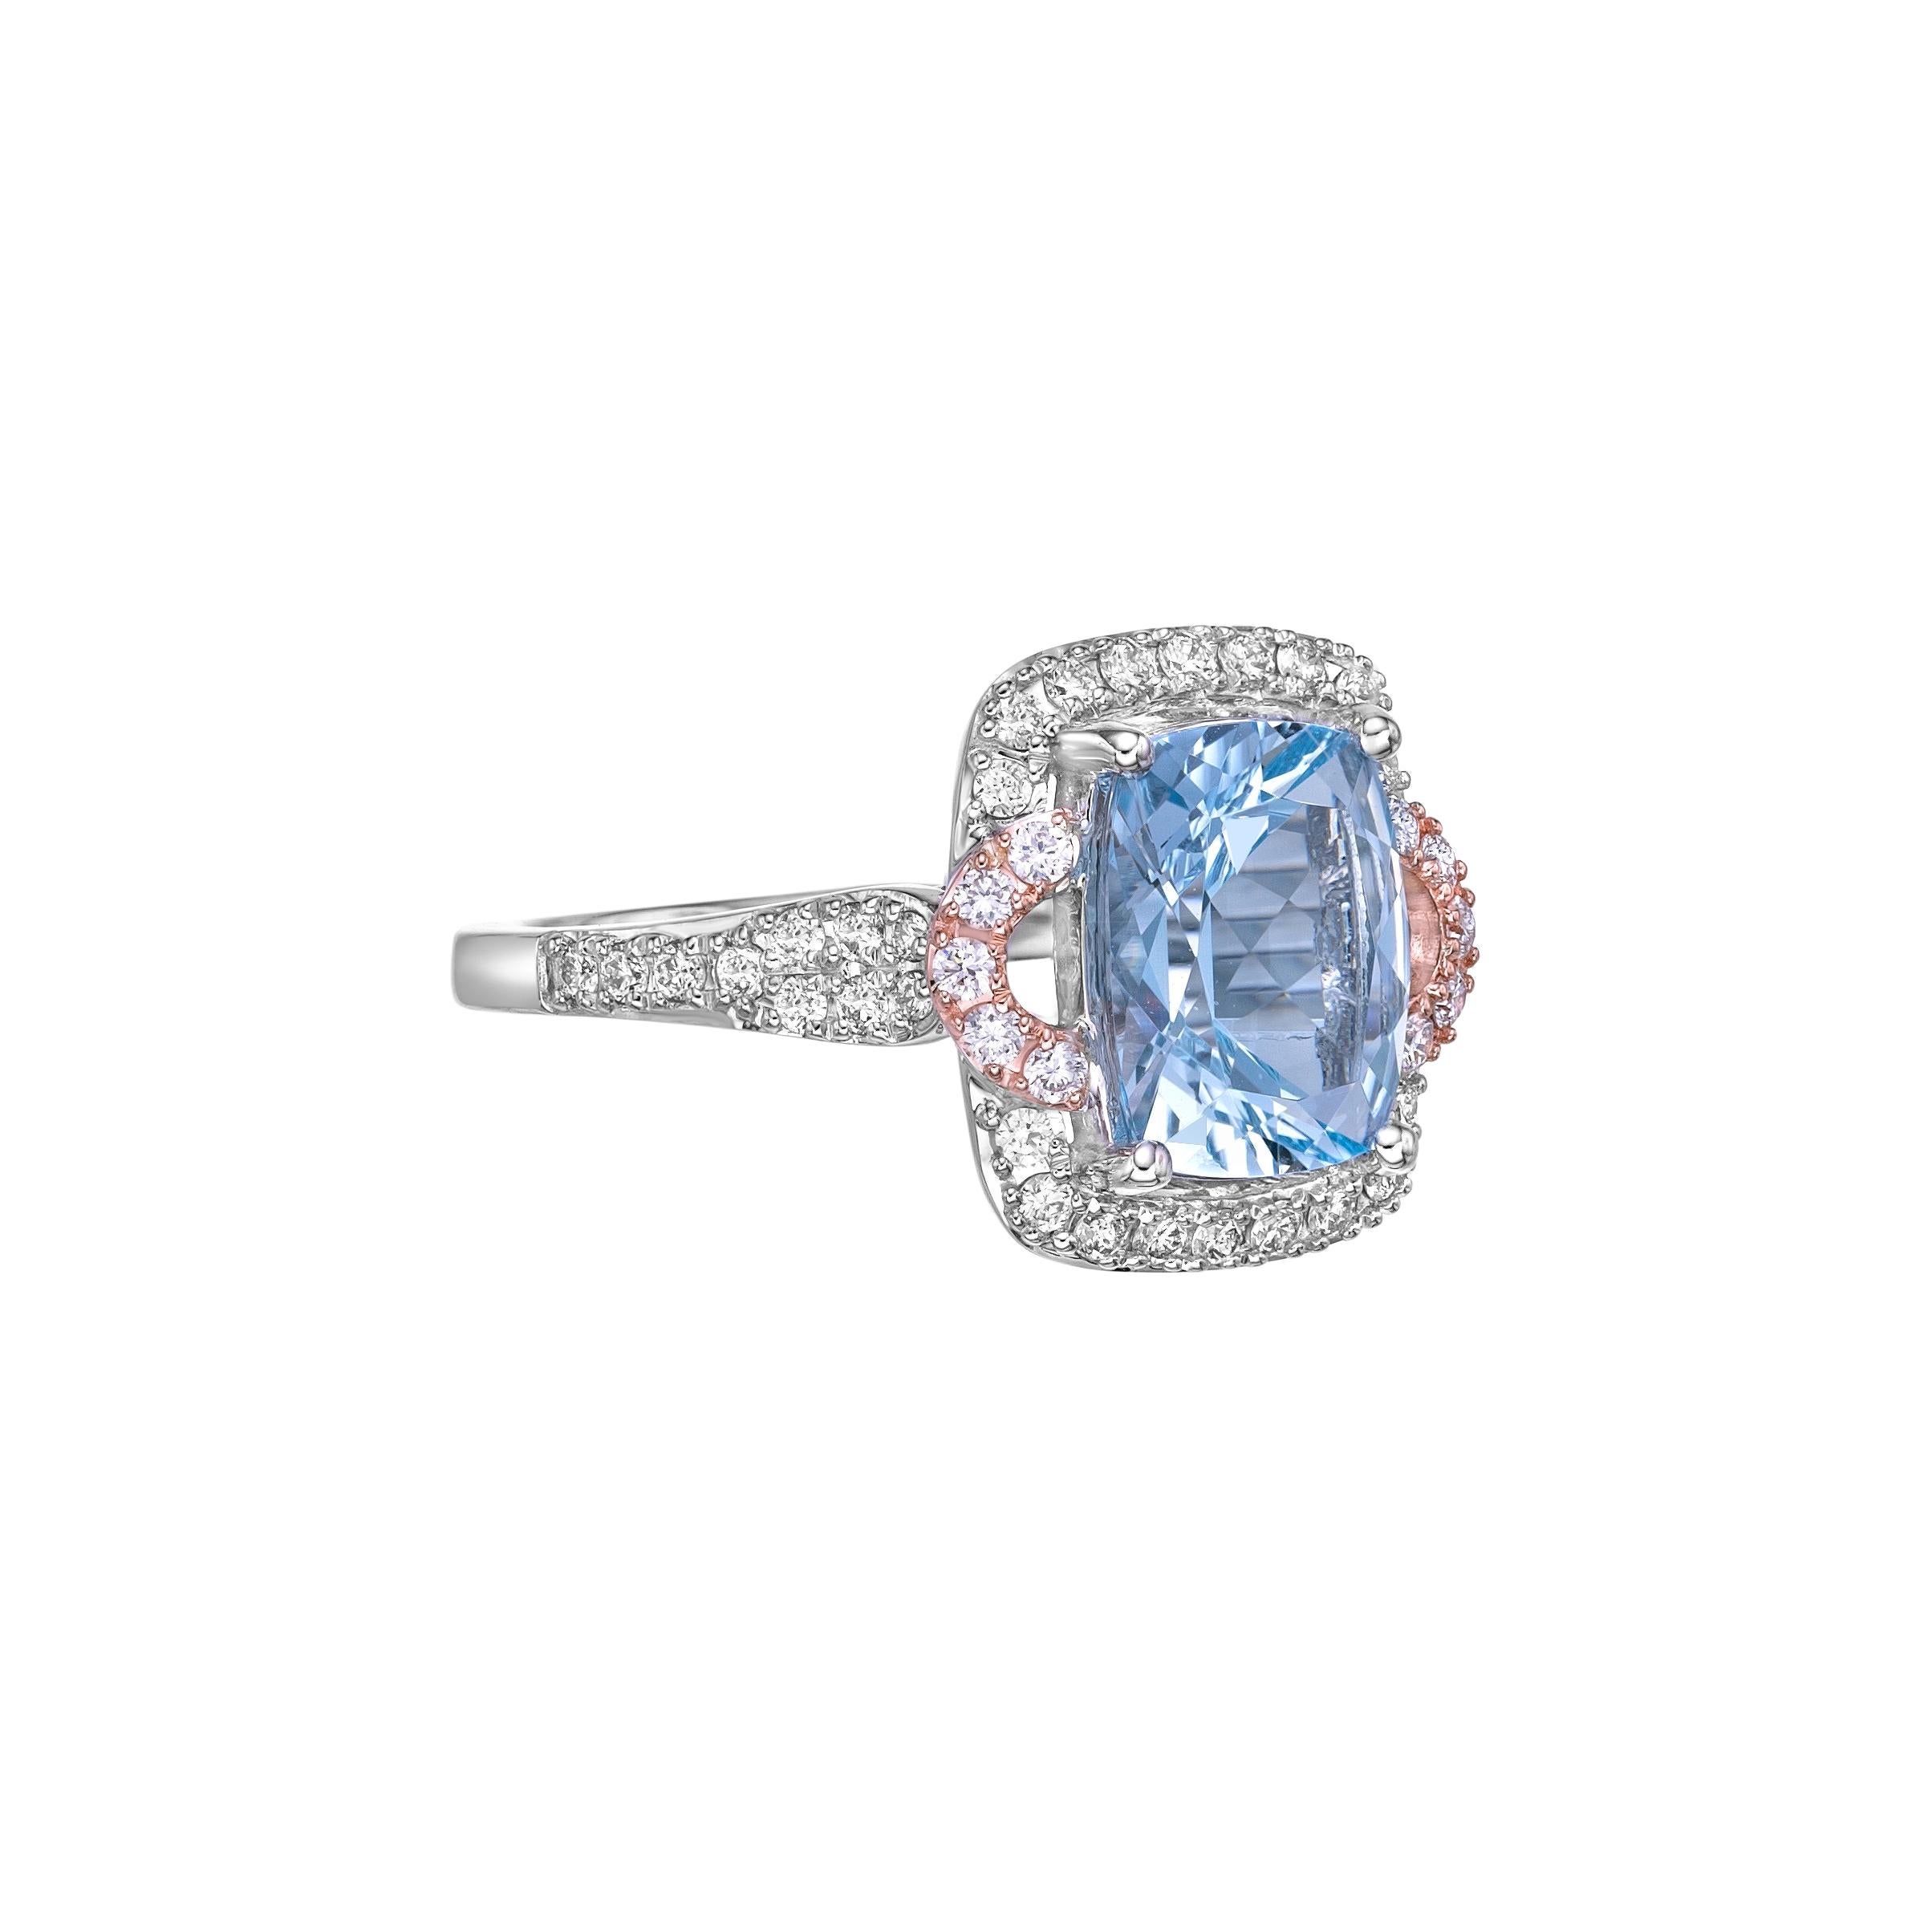 This collection features an array of Aquamarines with an icy blue hue that is as cool as it gets! Accented with Diamonds this ring is made in white rose gold and present a classic yet elegant look.
  
Aquamarine Fancy Ring in 18Karat White Rose Gold